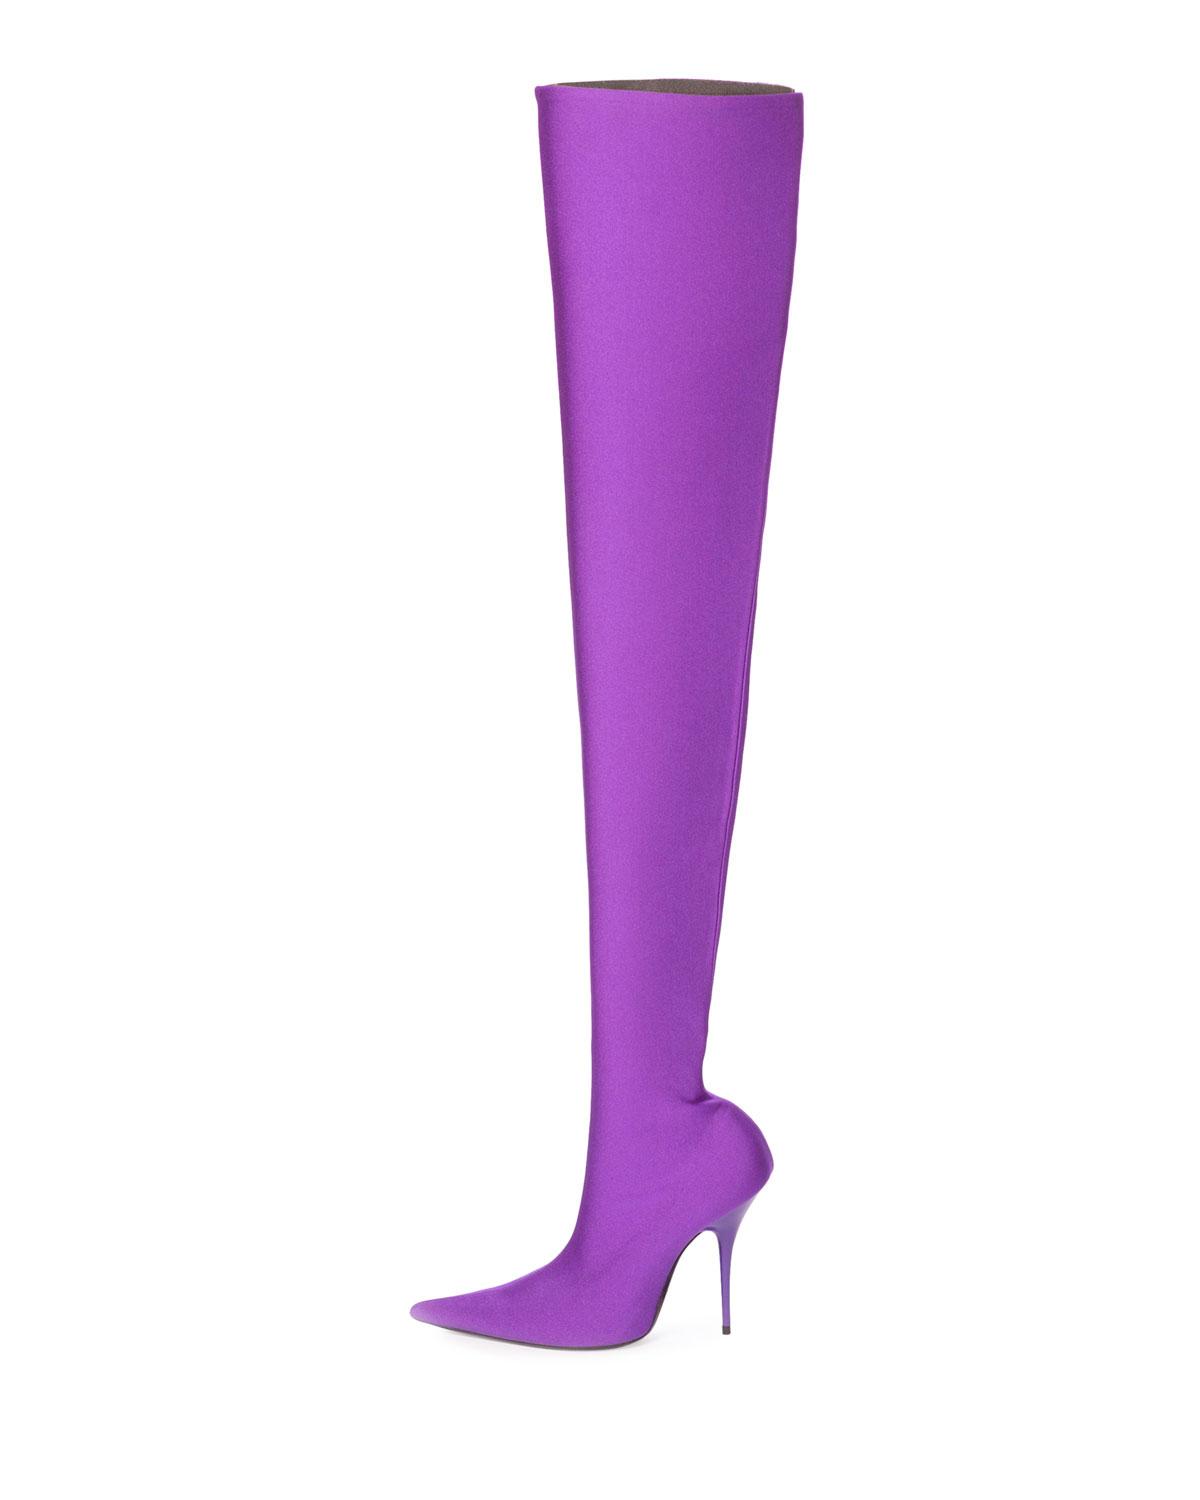 the-knee Spandex Boot in Purple 